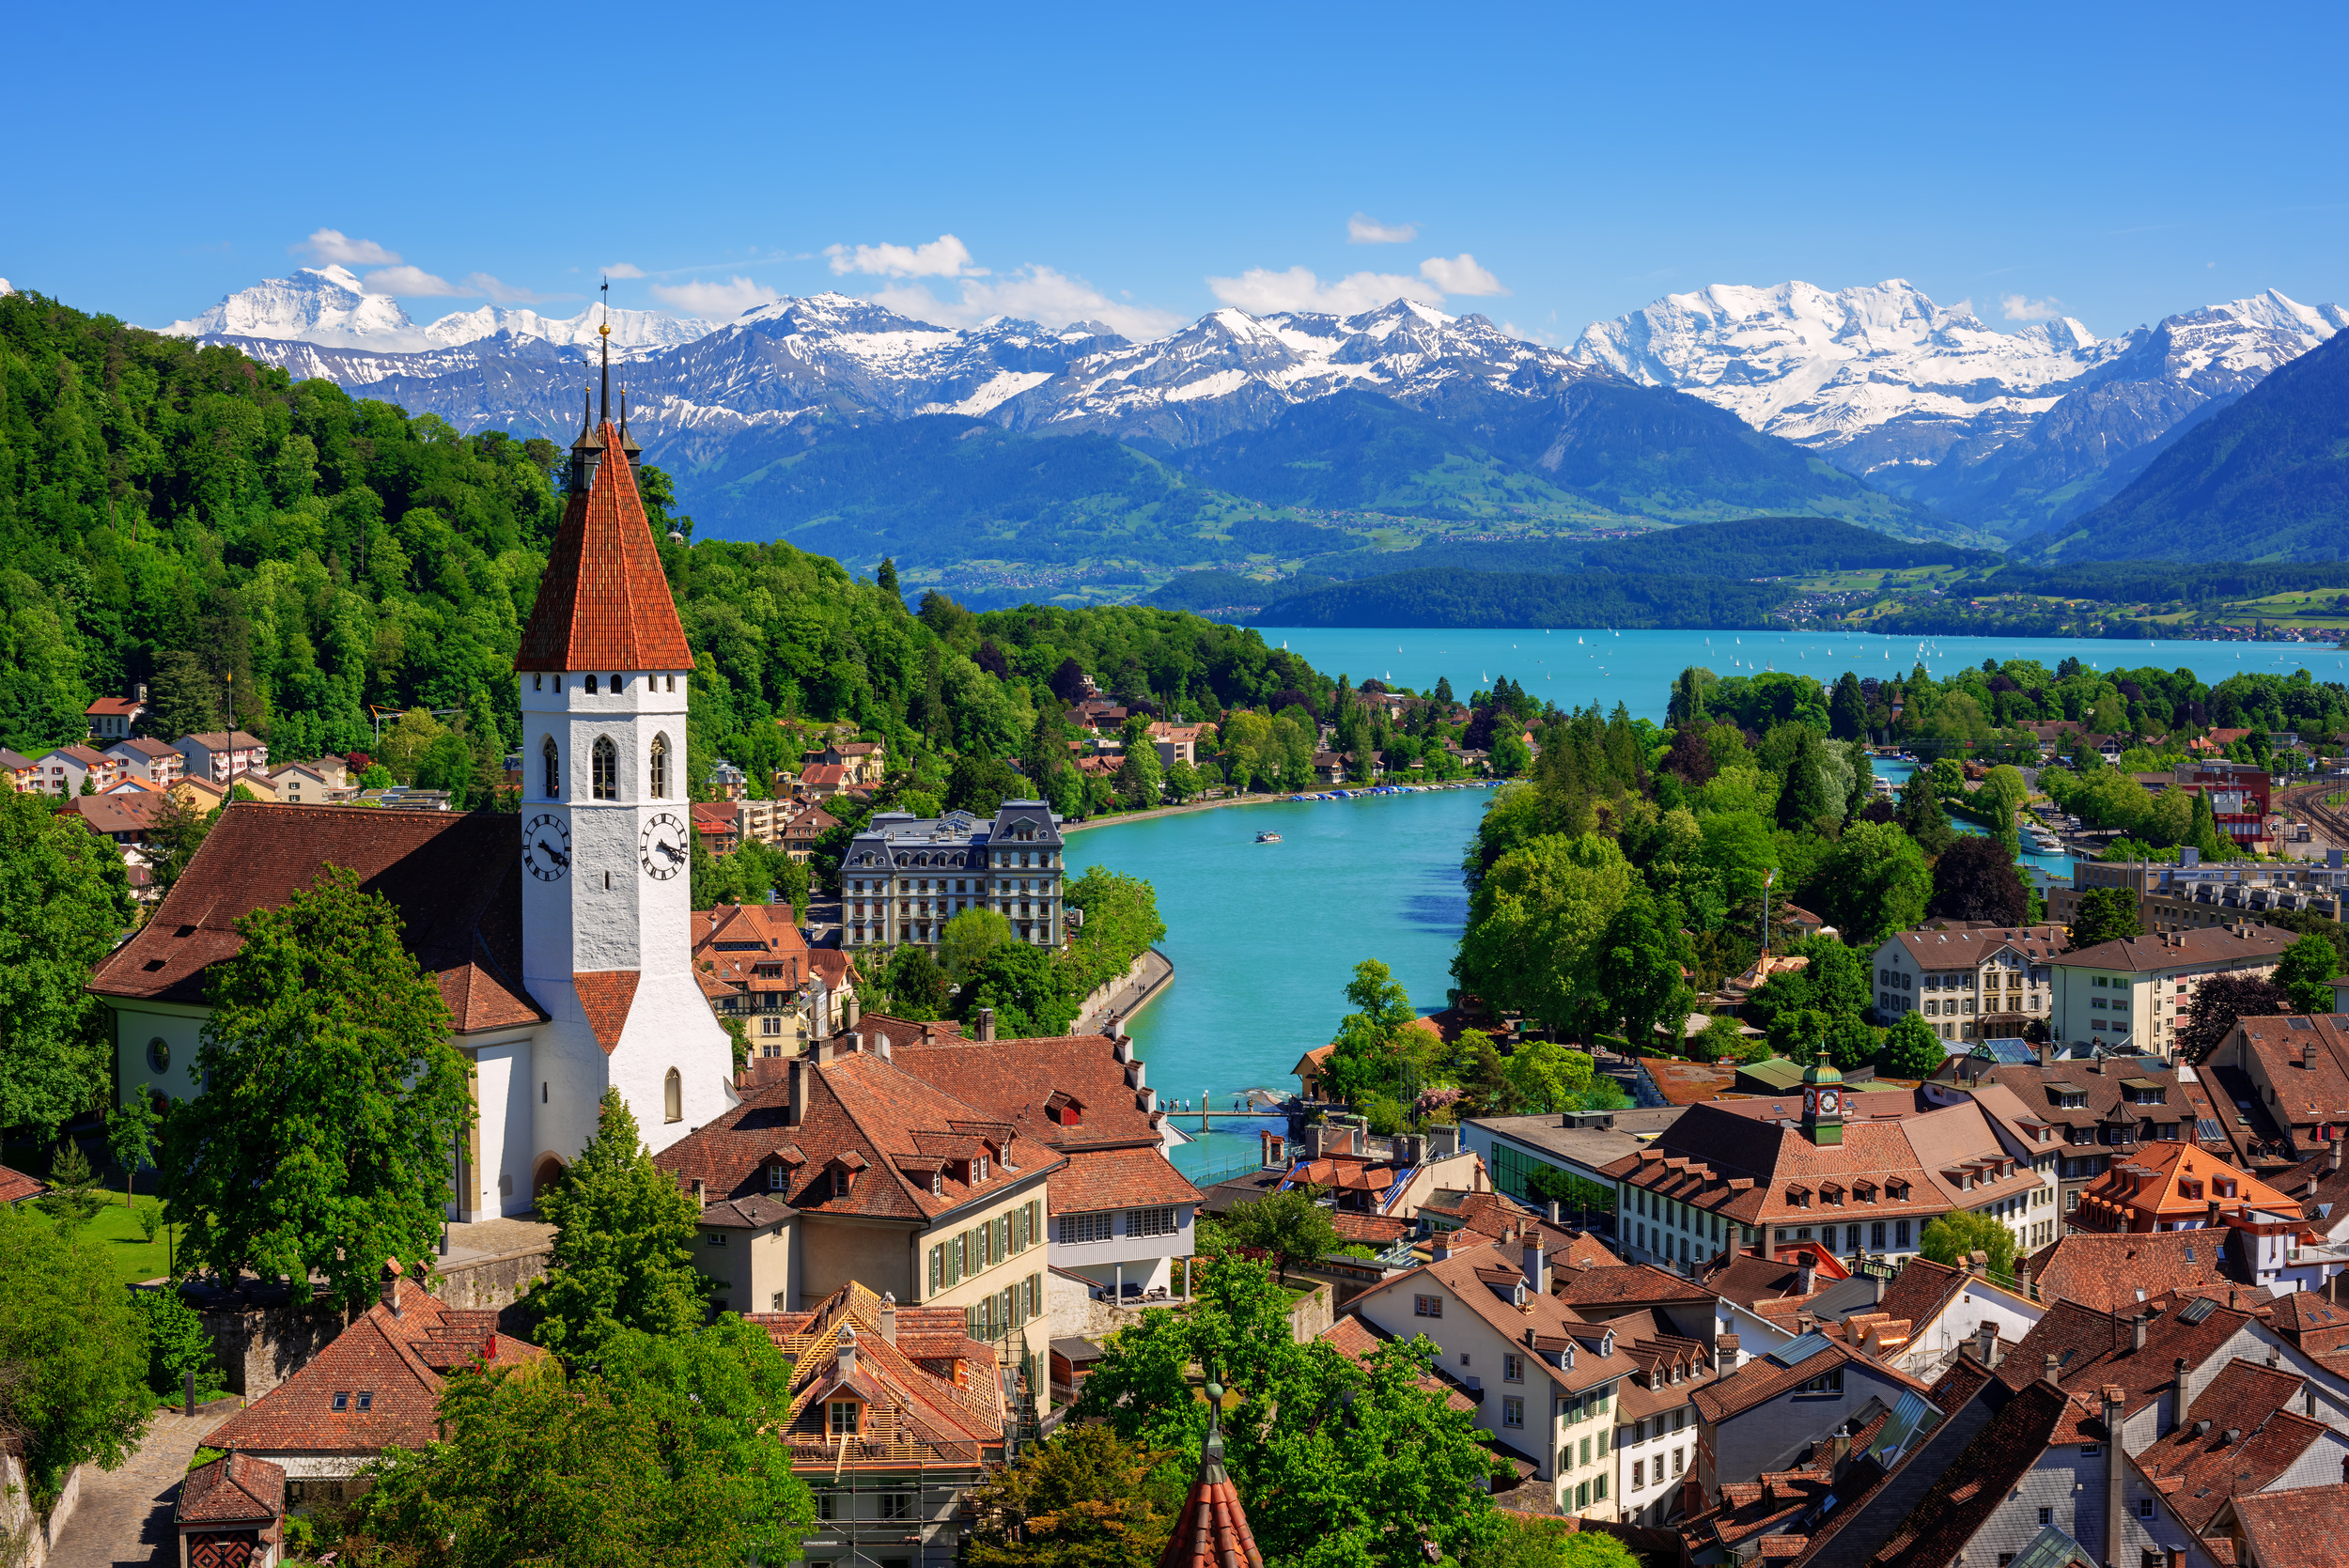 <p>Yet another European country with French as one of the official languages (the others are German, Italian, and Rhaeto-Romance). You’ll find French most useful in Geneva and the surrounding area, although it’s used throughout Switzerland.</p><p>You may also like: <a href='https://www.yardbarker.com/lifestyle/articles/sweet_world_25_dessert_recipes_from_around_the_globe/s1__38839778'>Sweet world: 25 dessert recipes from around the globe</a></p>